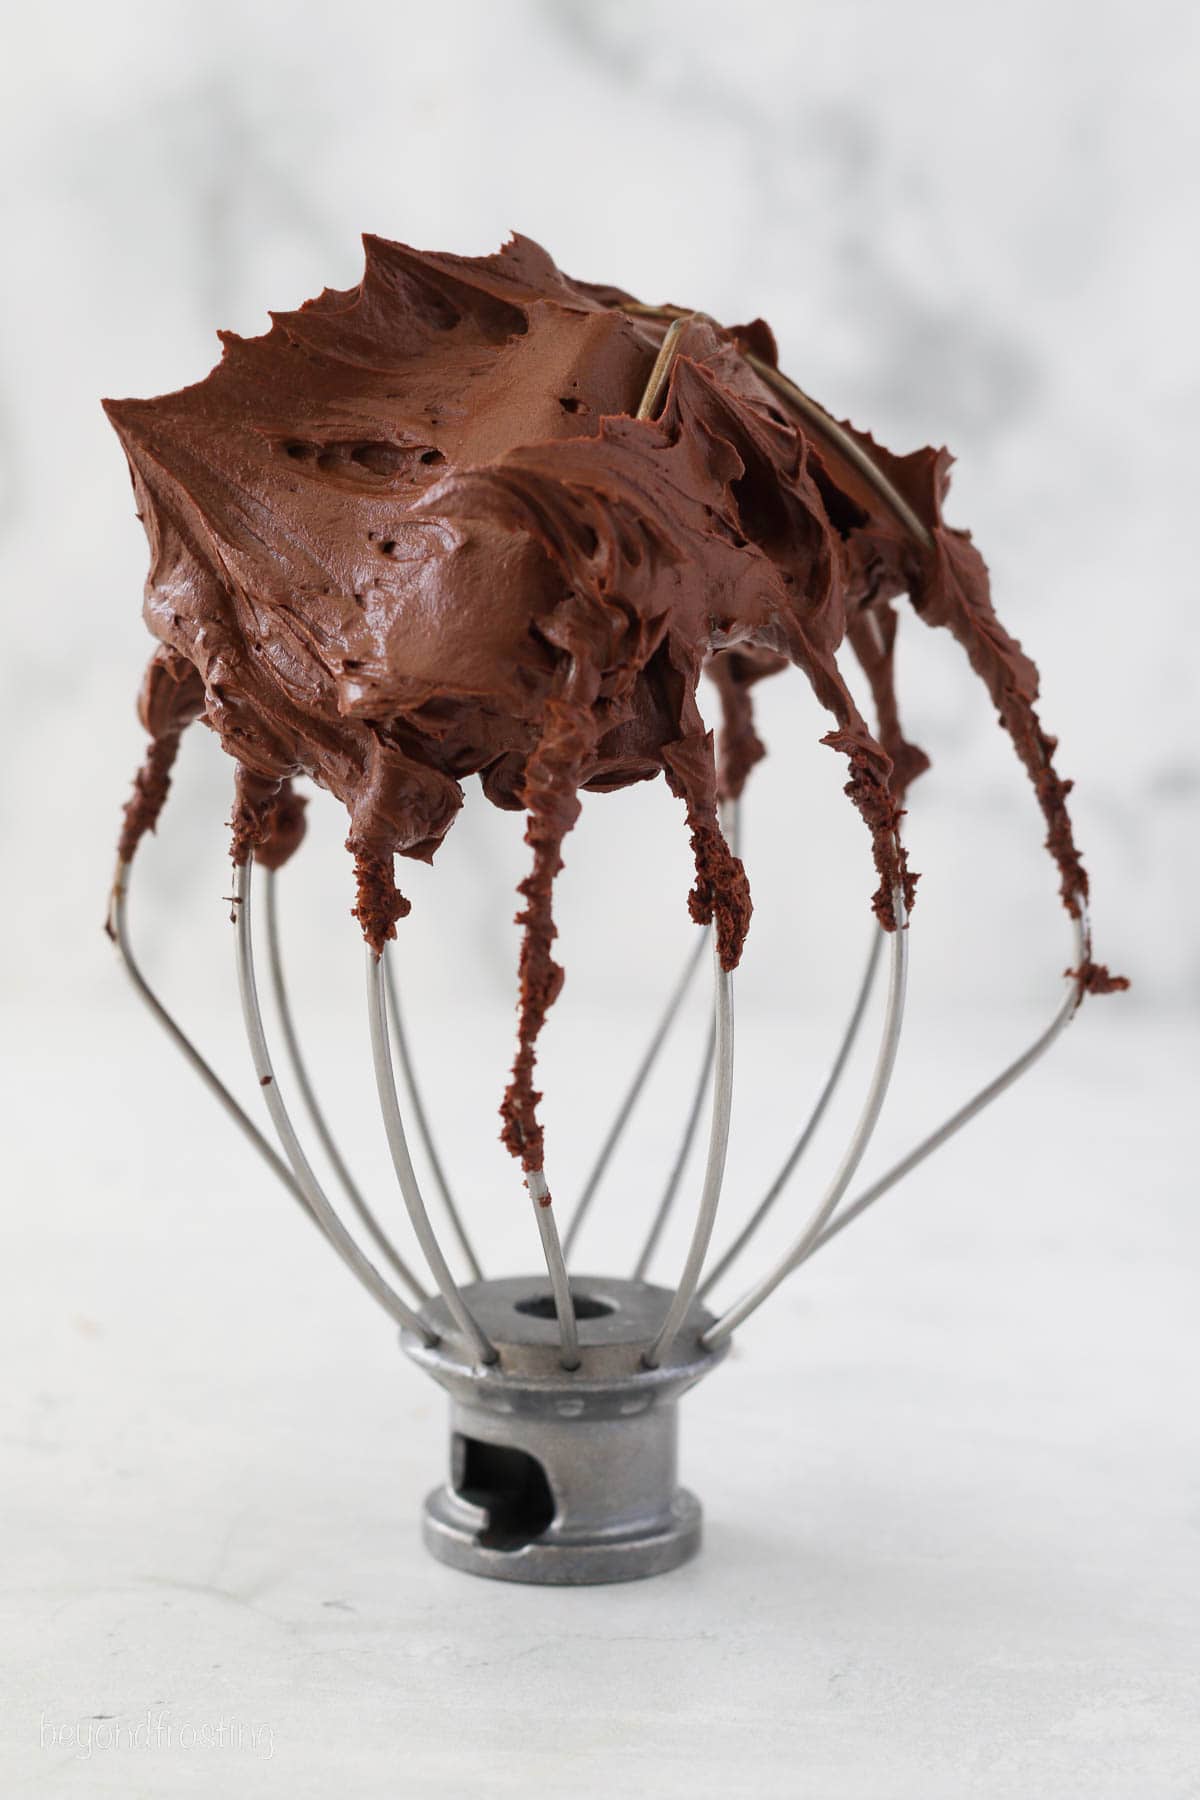 A stand mixer attachment topped with whipped ganache frosting.